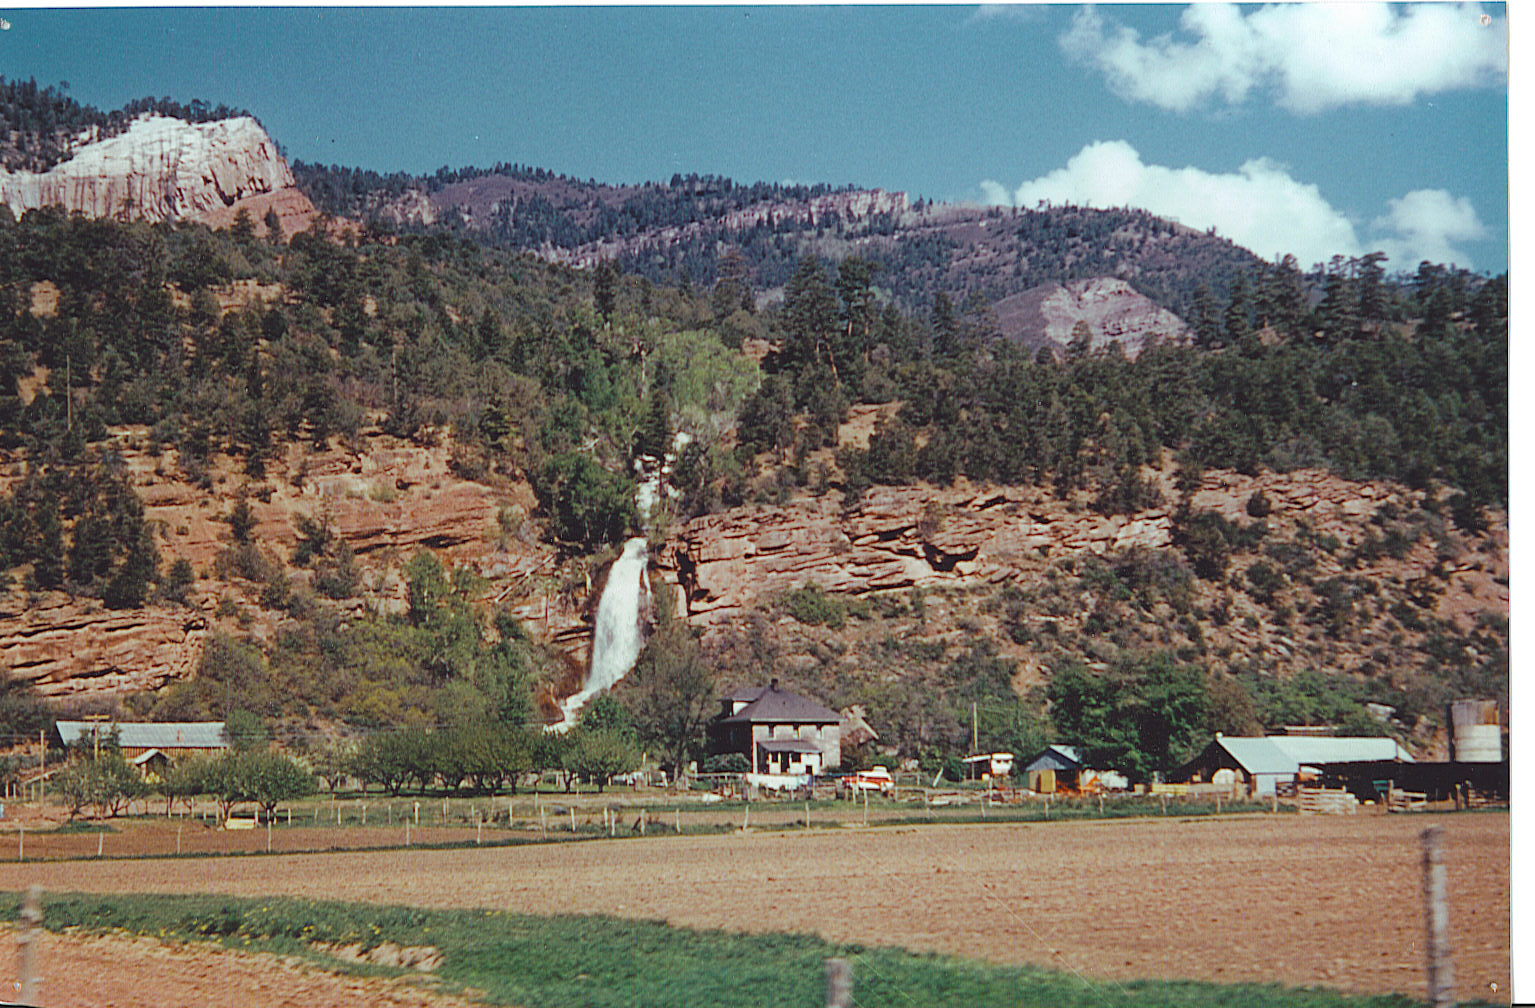 A far shot of the Waterfall Ranch, including the waterfall for which the ranch is named and the original home..